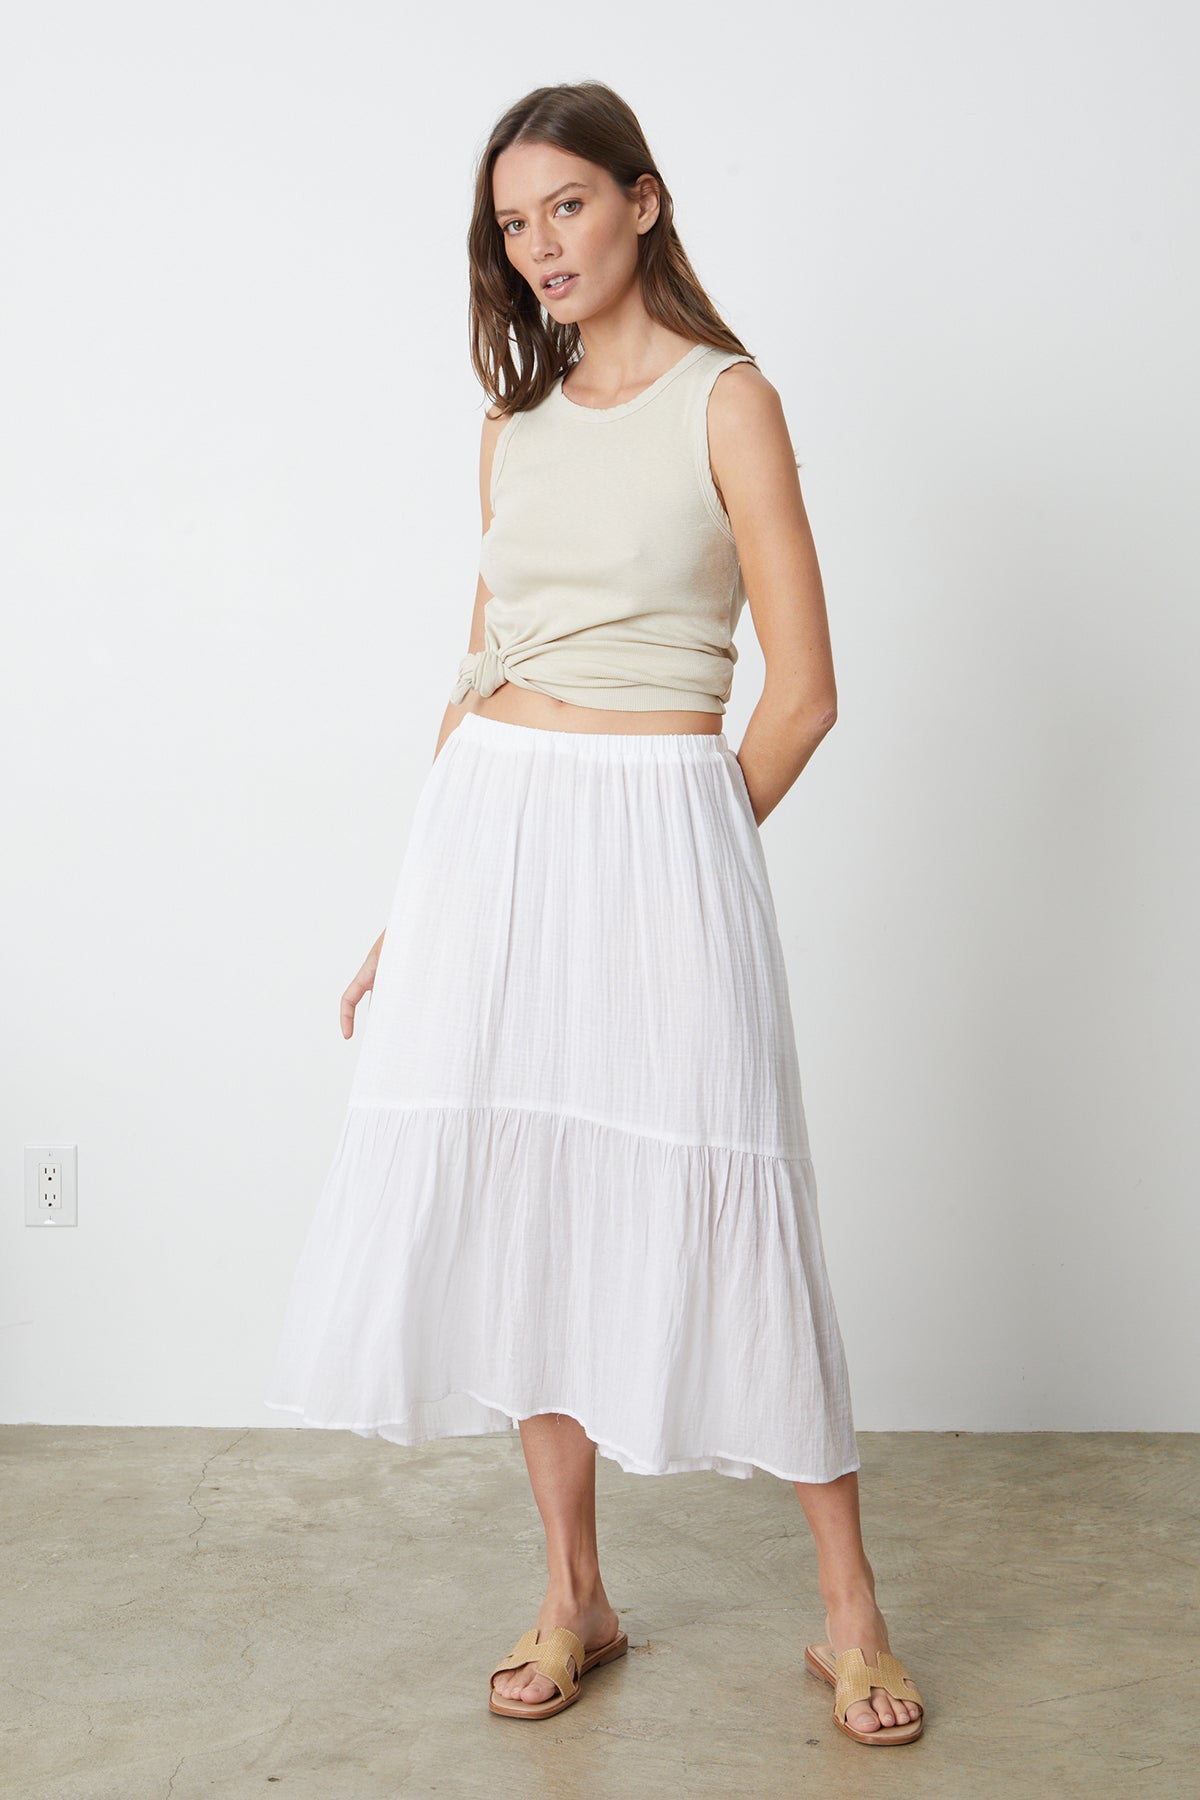   Mckenna Tiered Skirt in white with Aliza tank in gravel tied with knot to show waist full length front 